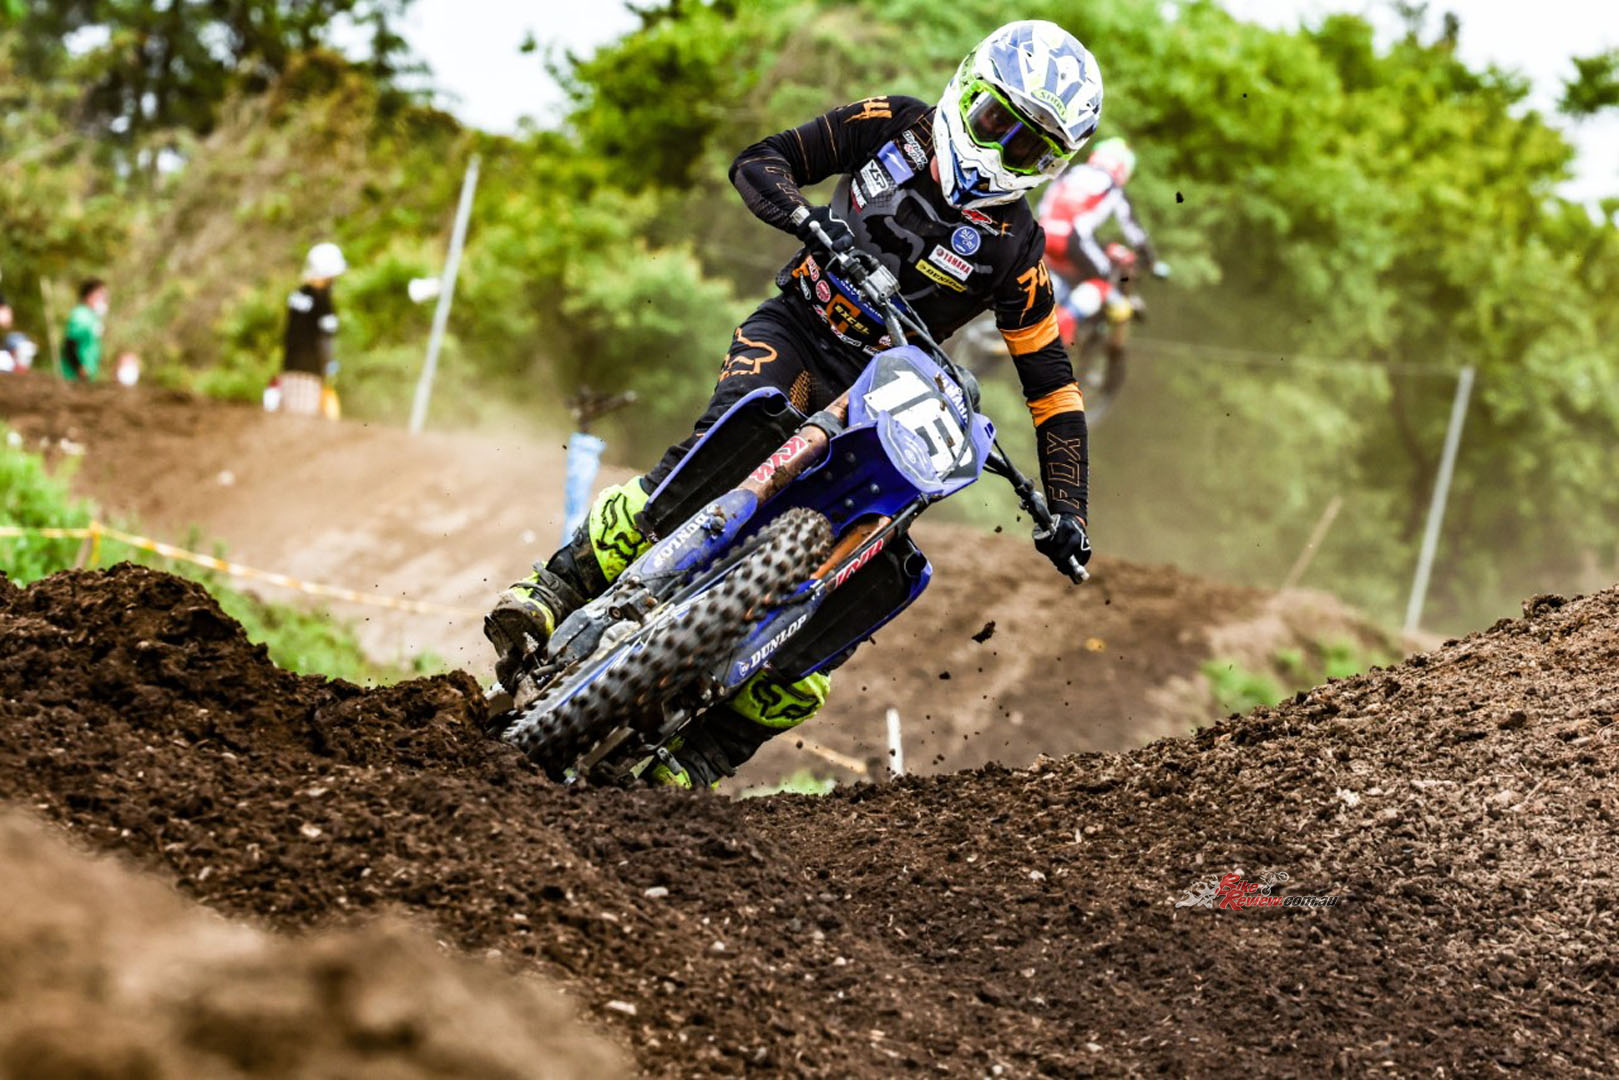 Yamaha Factory Racing’s Jay Wilson remains unbeaten in the 2022 IA2 (250cc) division, after two rounds of the Japanese Motocross Championship, after dominating round two with a perfect 1-1 score.